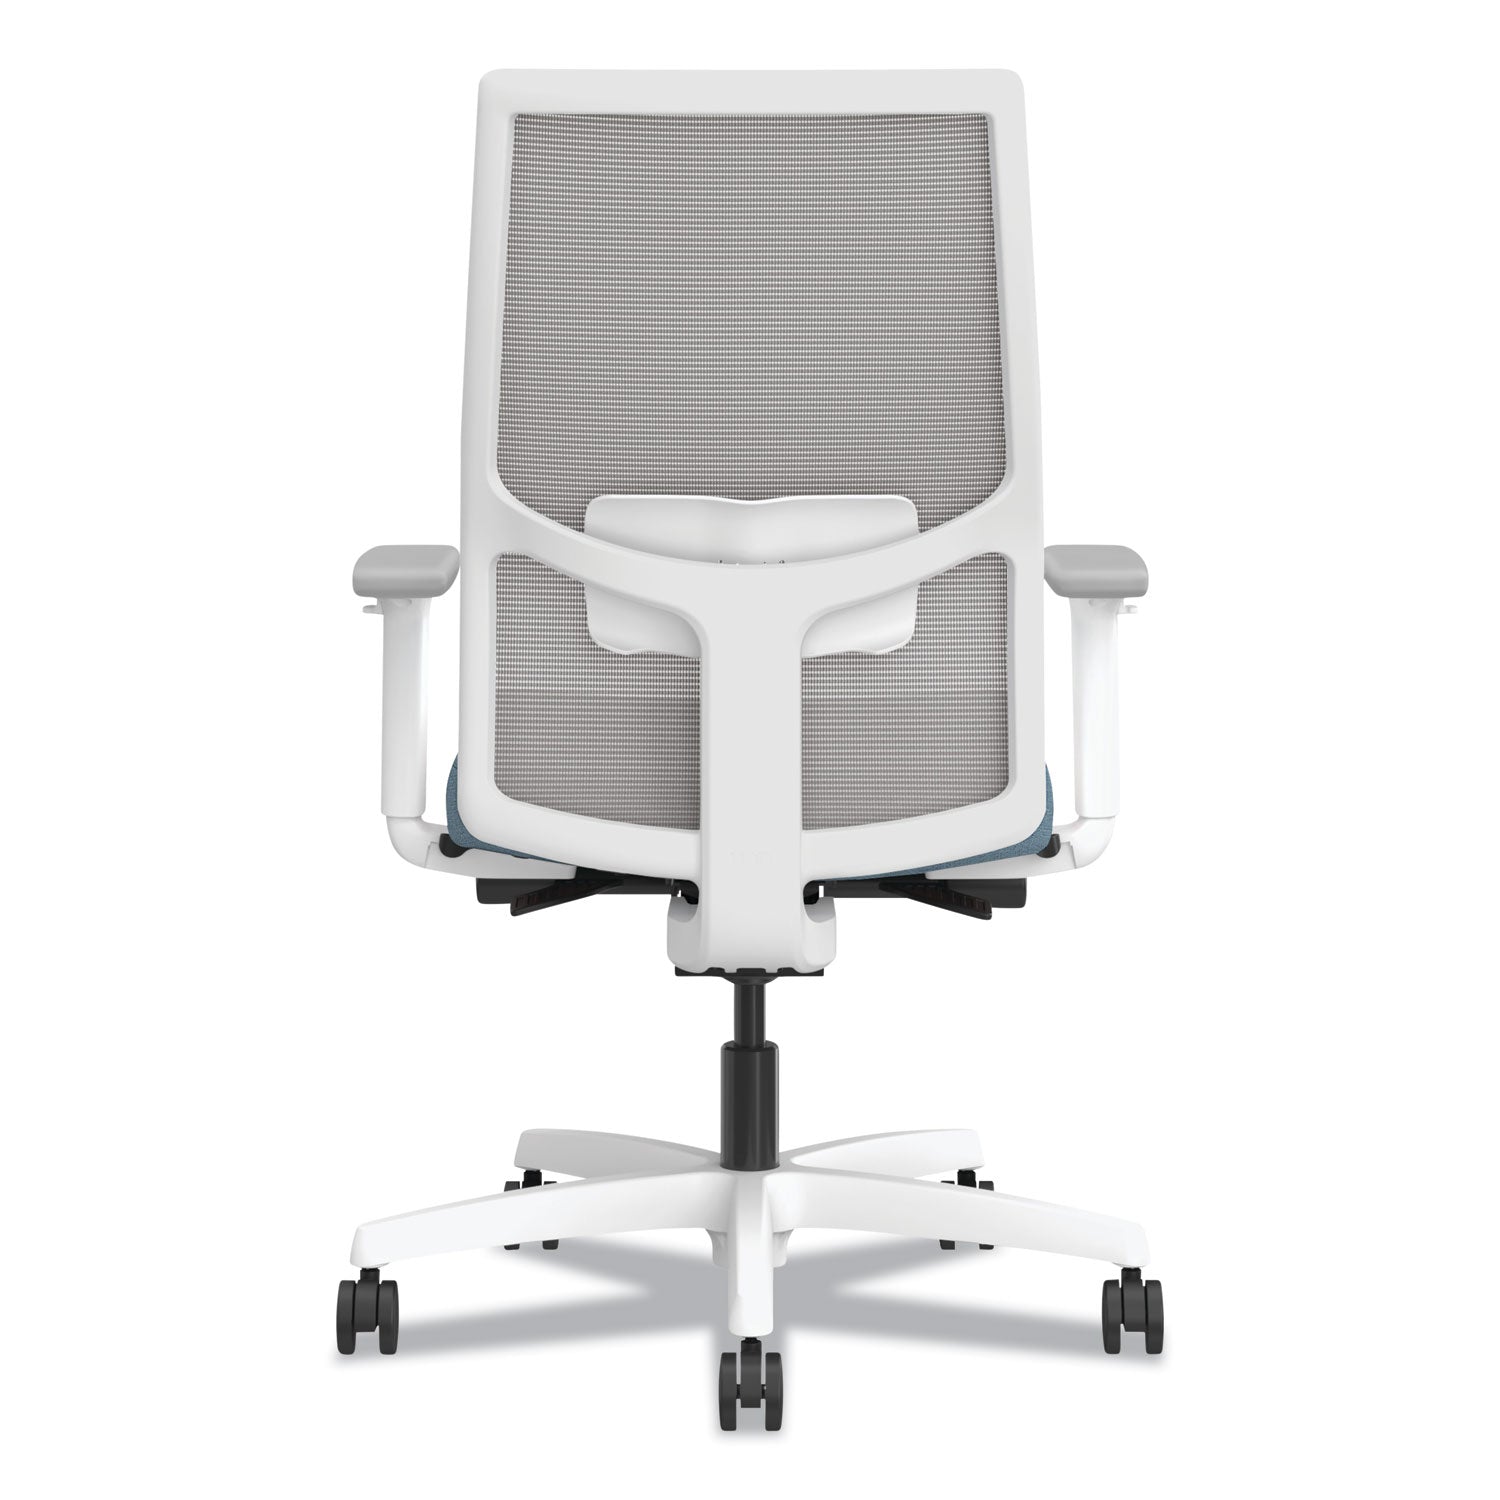 ignition-20-4-way-stretch-mid-back-mesh-task-chair-white-lumbar-support-carolina-fog-white-ships-in-7-10-business-days_honi2mm2afh21wx - 2